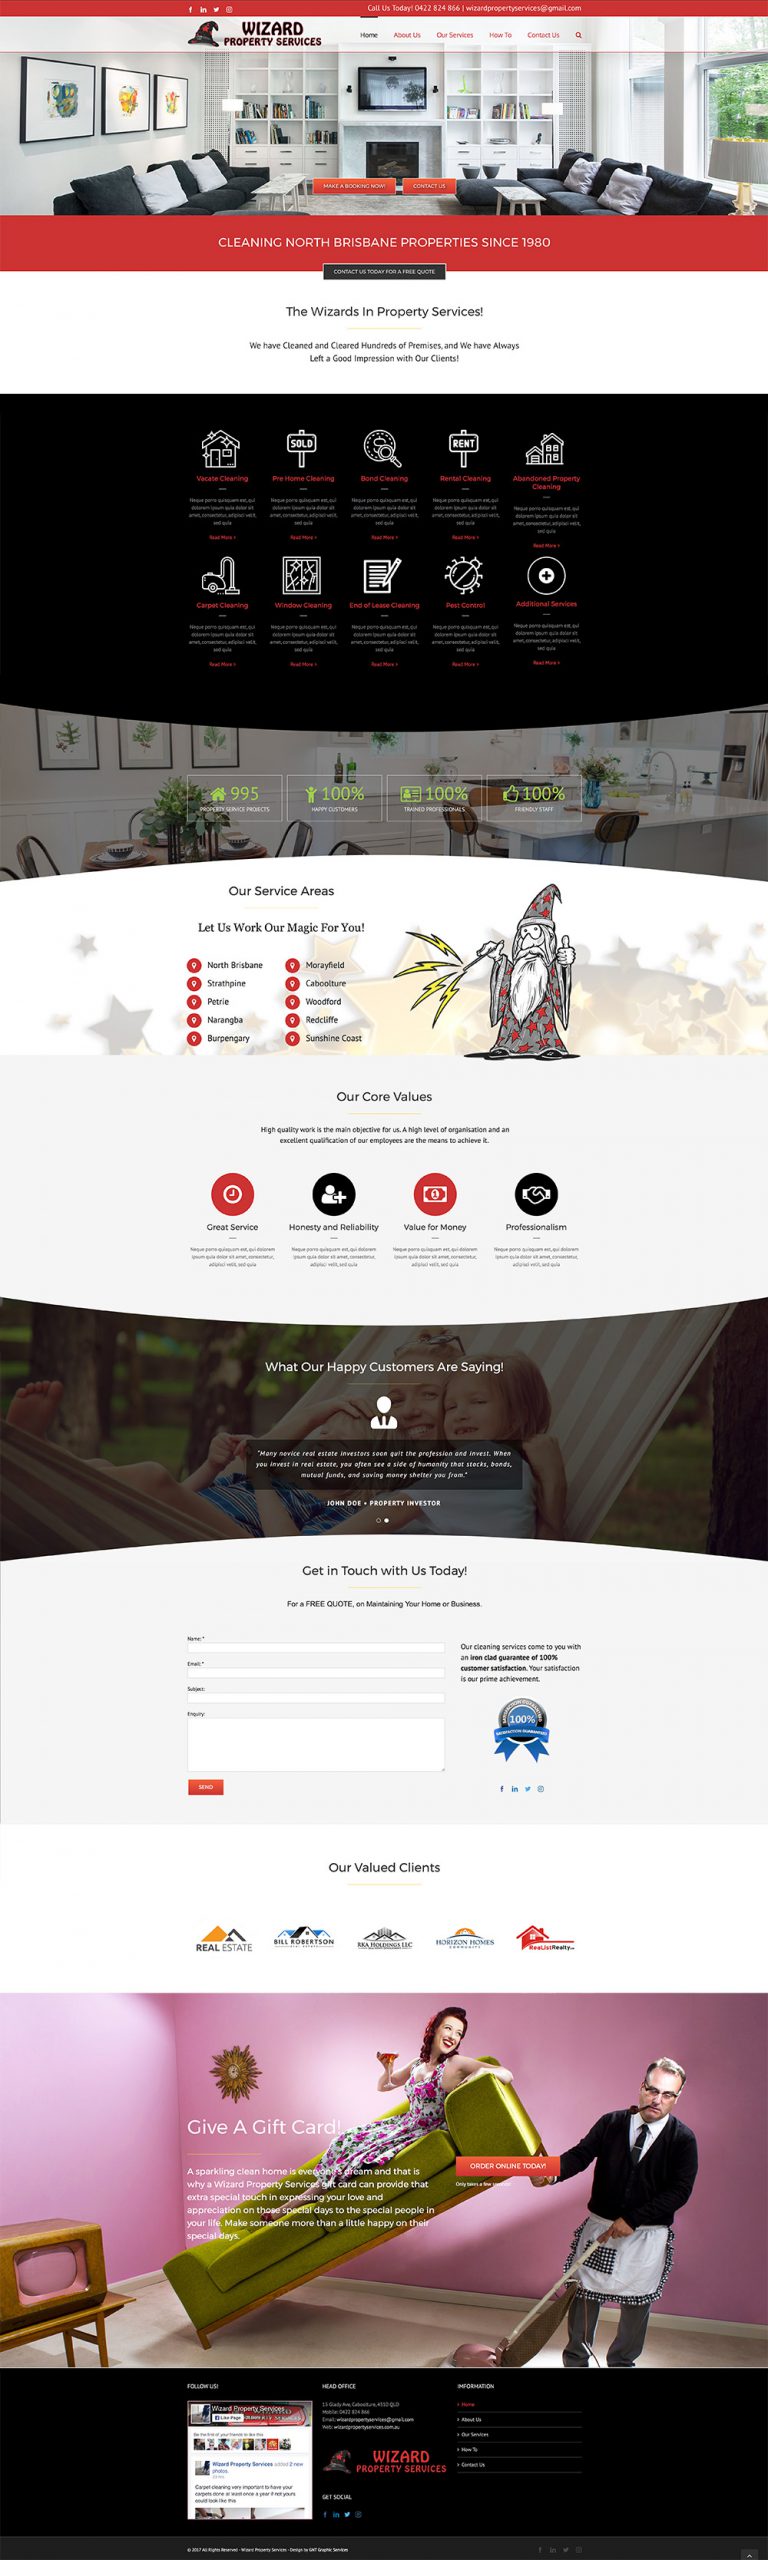 Wizard Property Services Website deigned & built by GNT Graphic Services